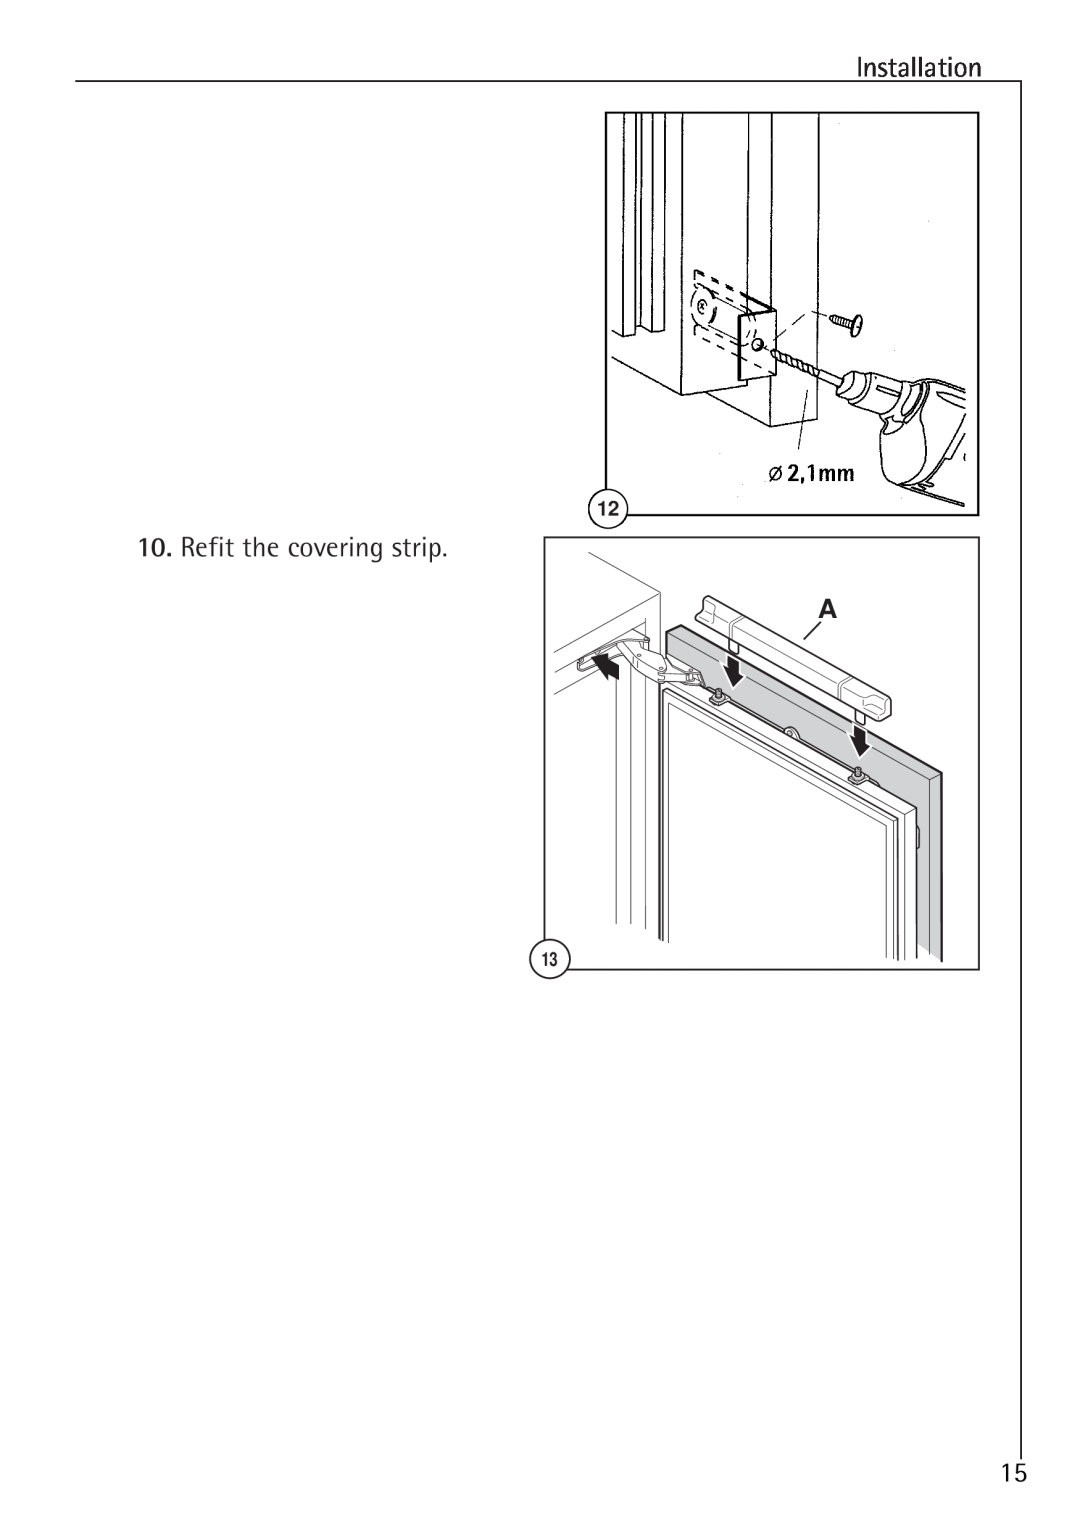 Electrolux SANTO U 86040 i installation instructions Refit the covering strip 